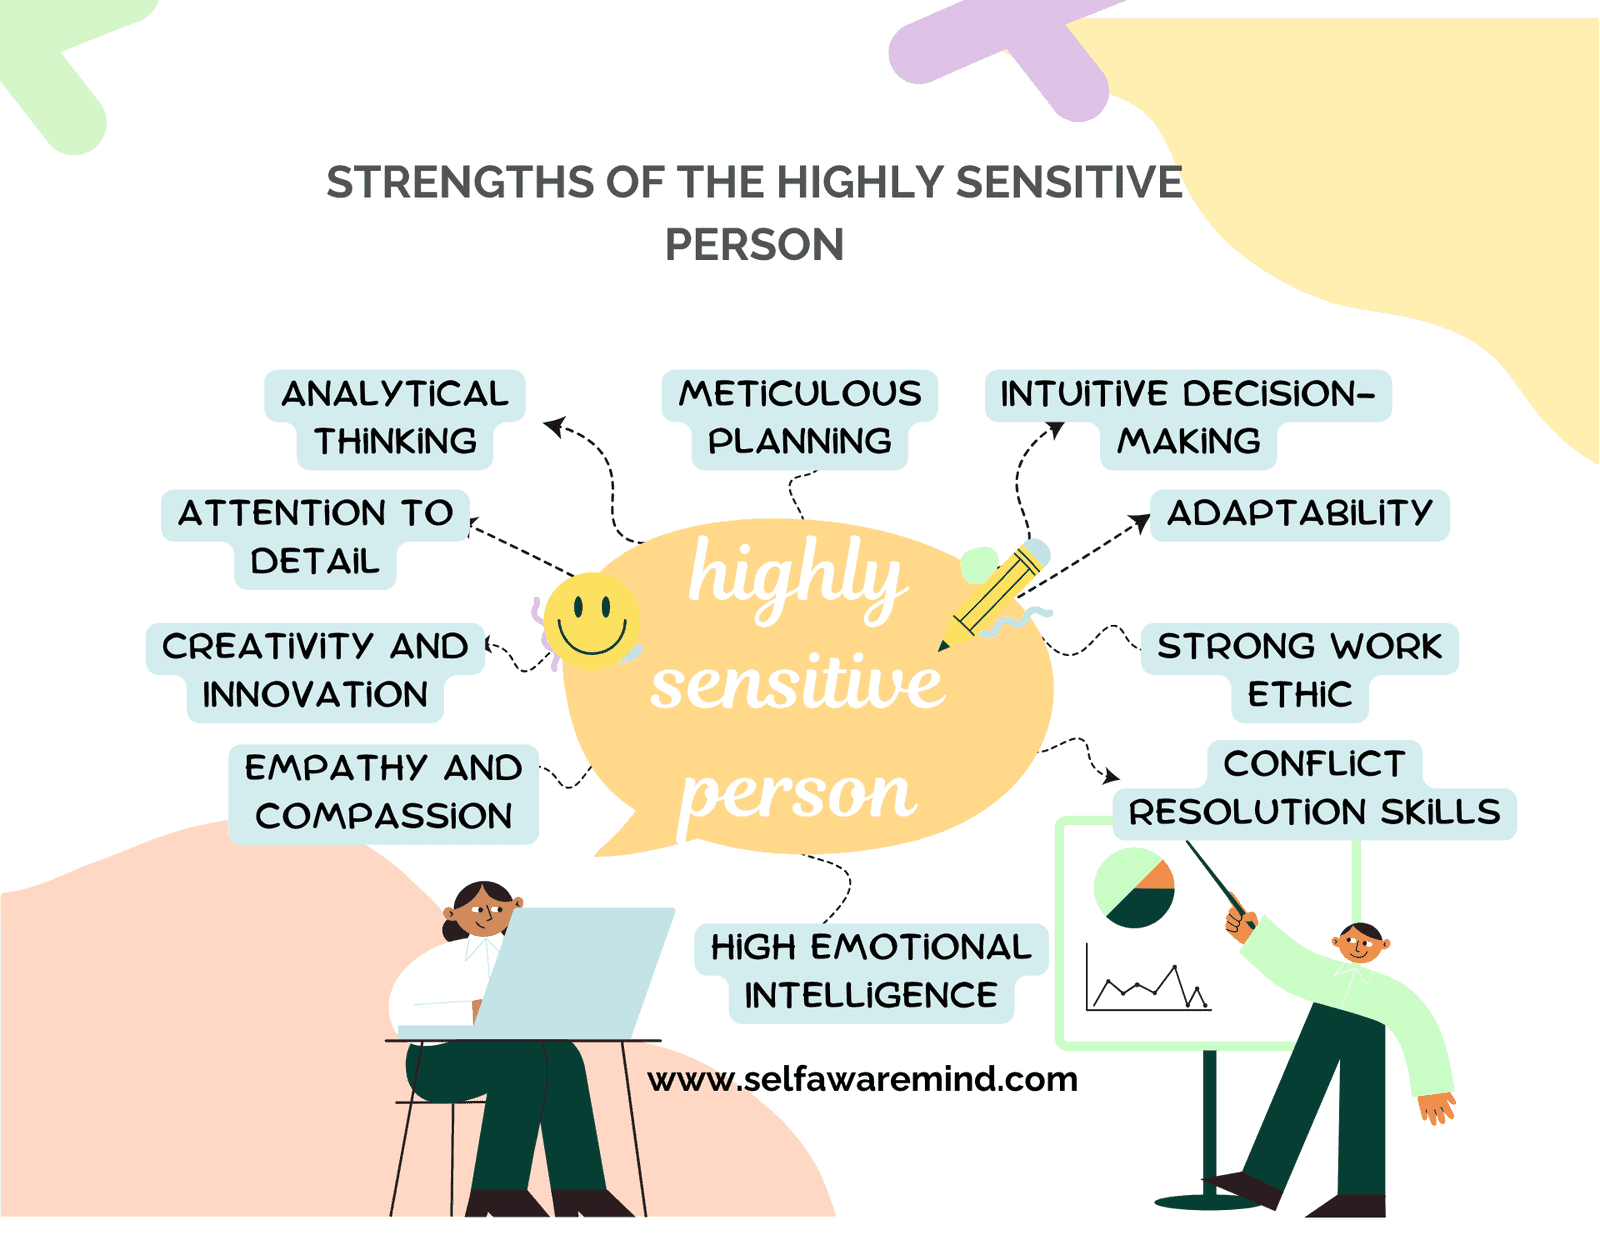 Strengths of the highly sensitive person